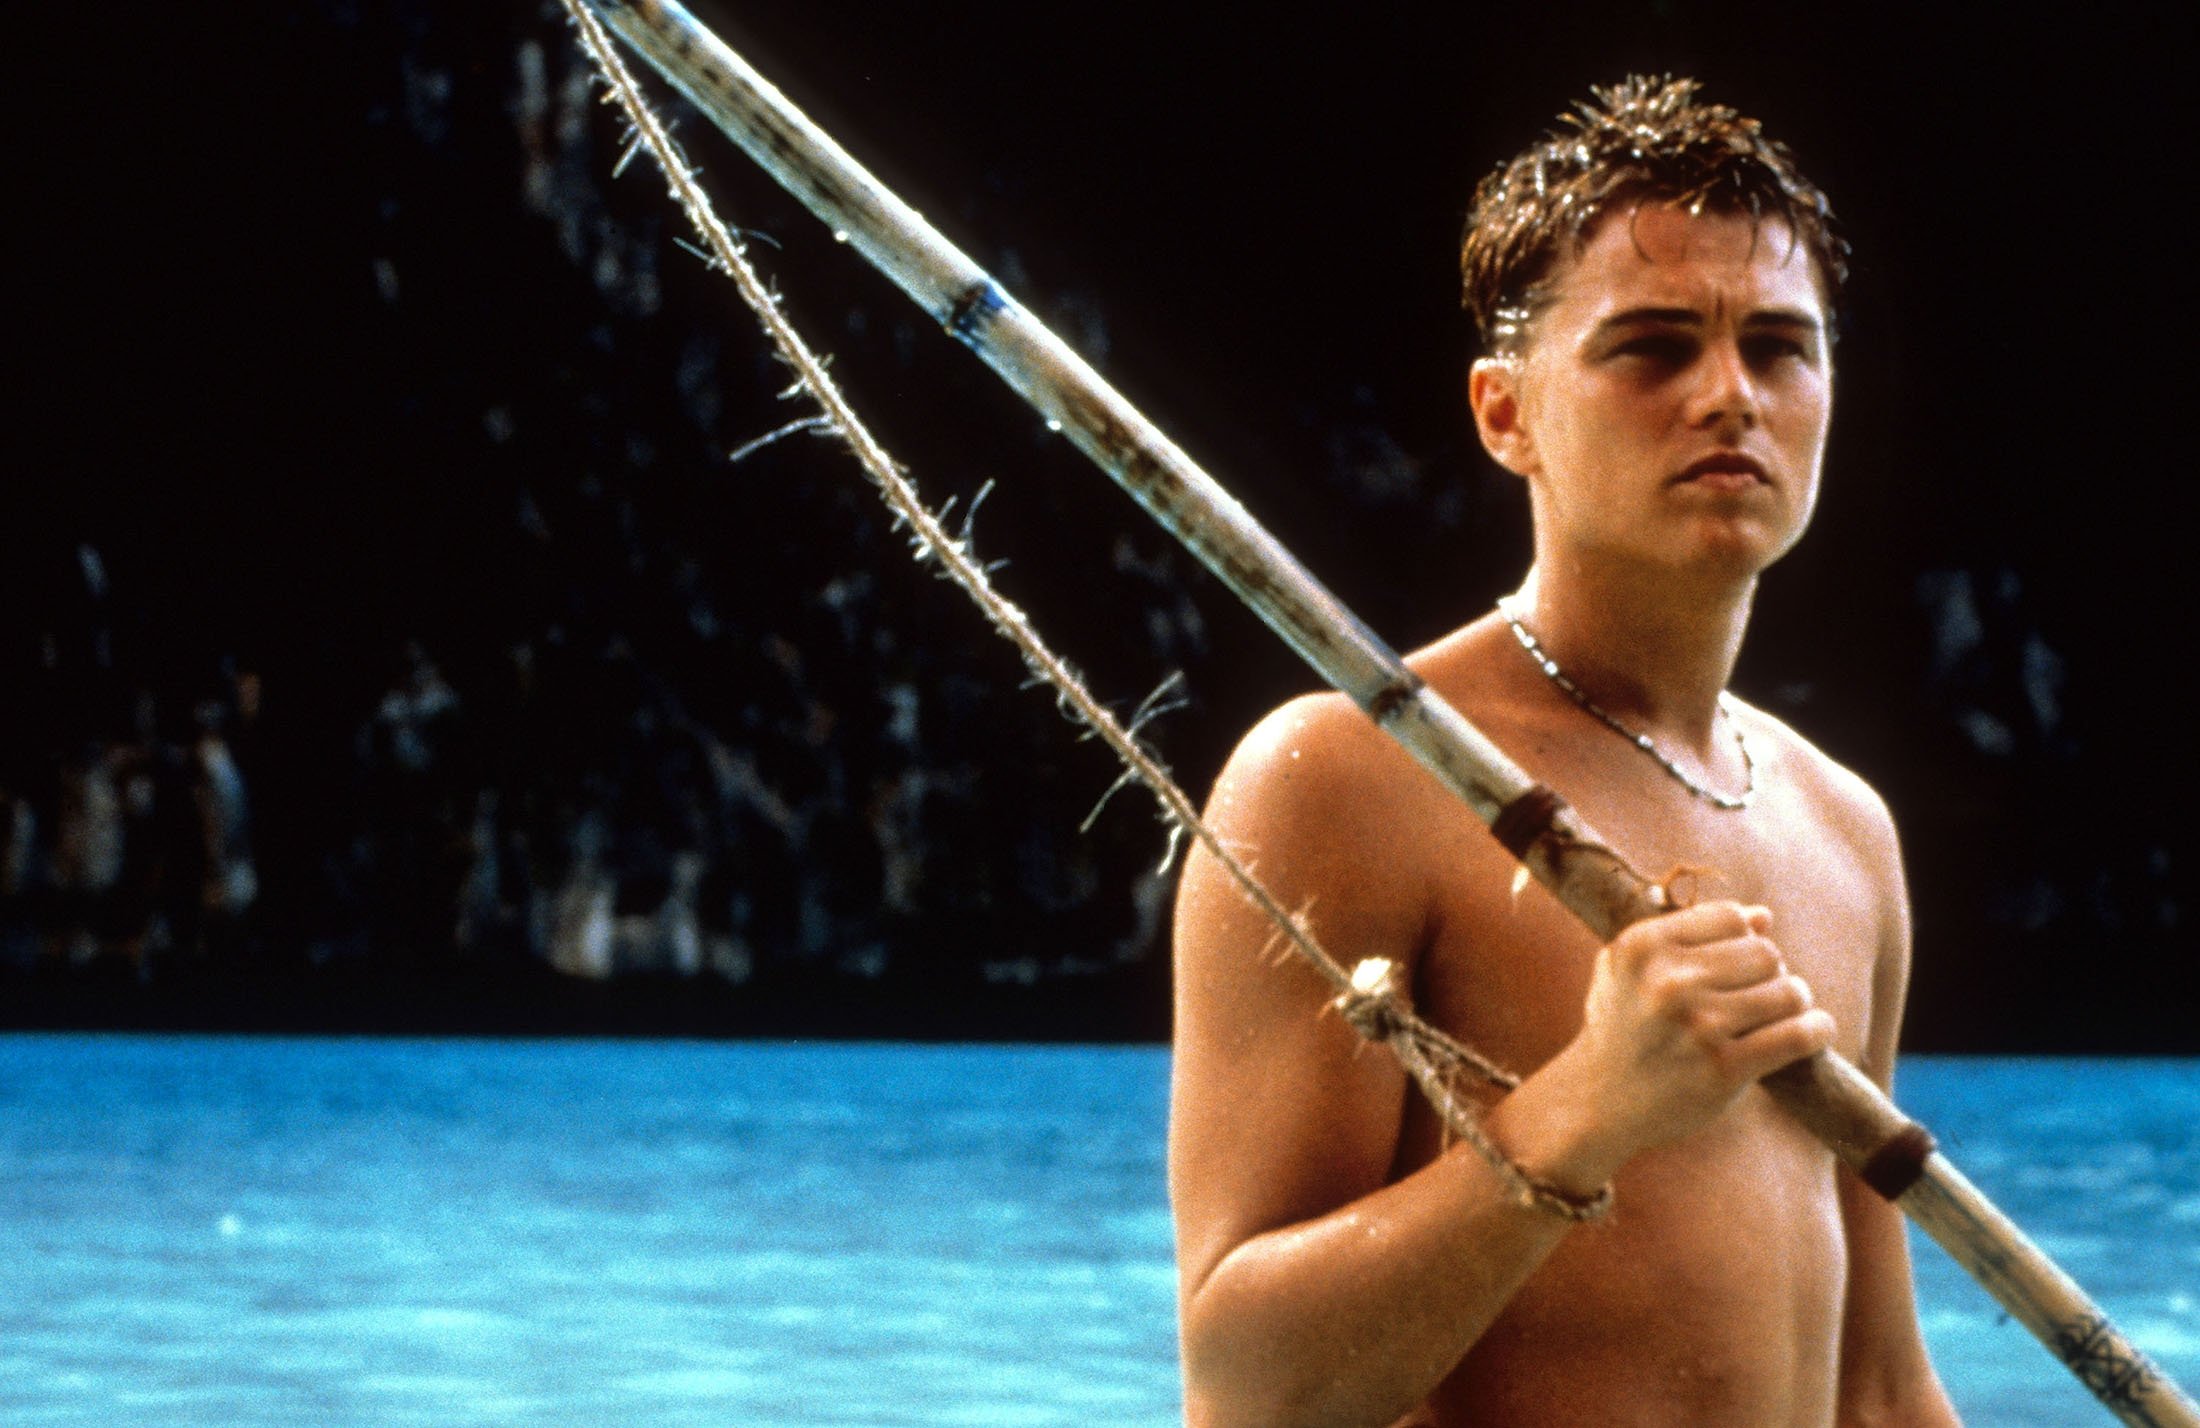 Leonardo DiCaprio, in a scene from the film “The Beach.” (Getty Images)